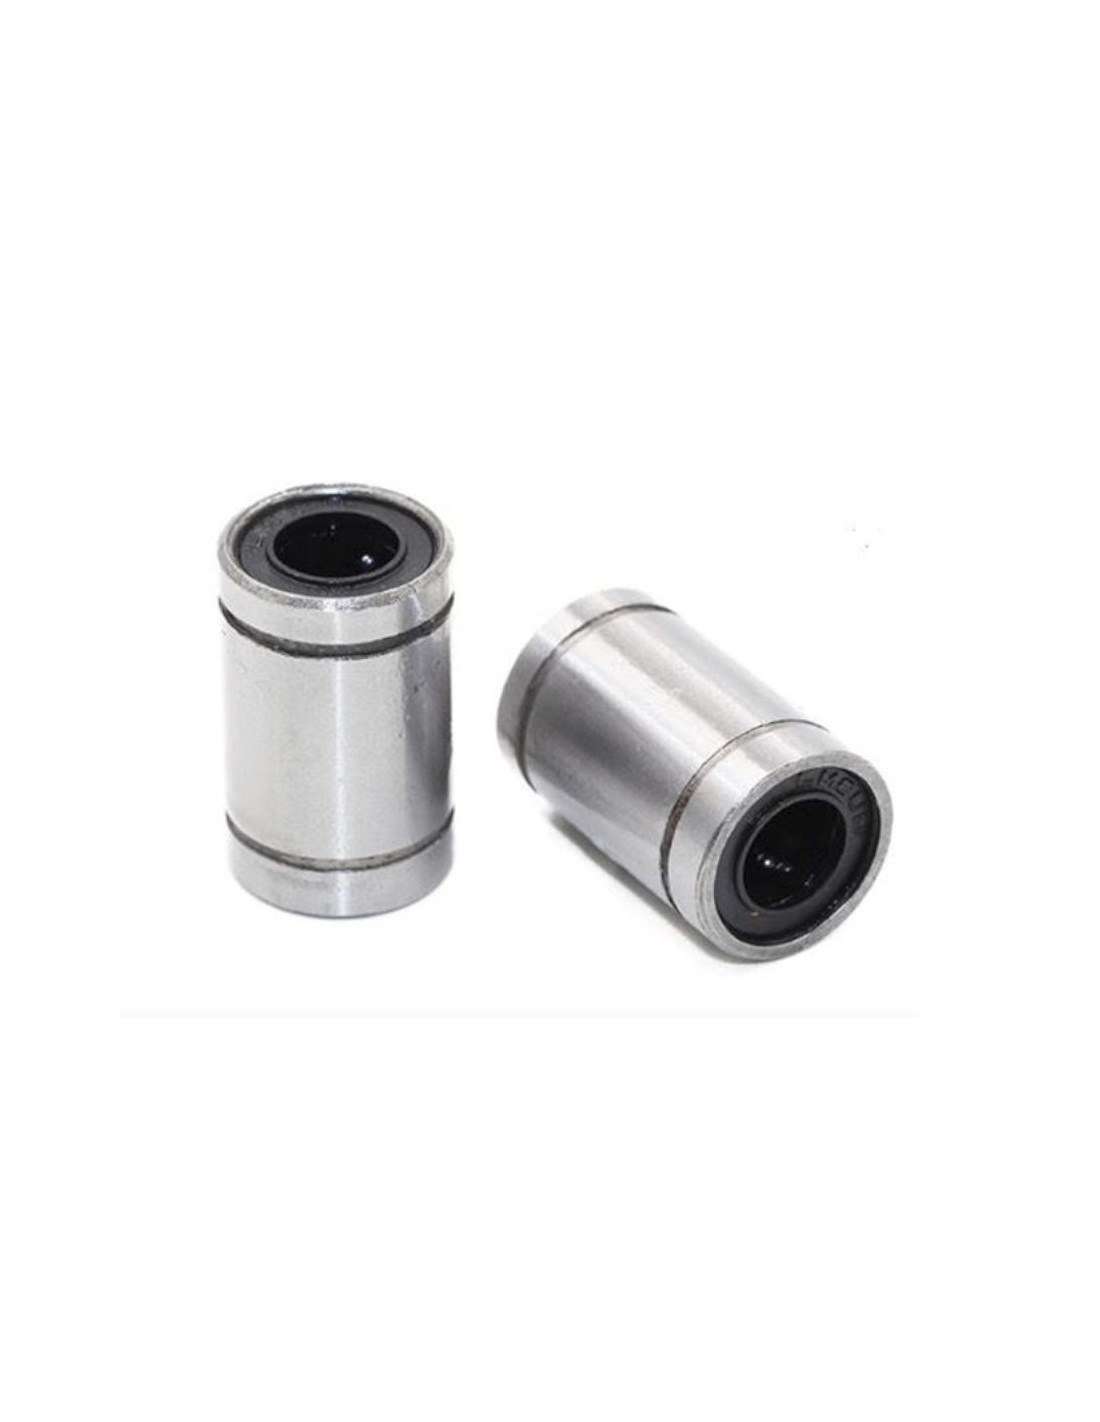 Steel bearing for CNC 10mm, 1 pc.